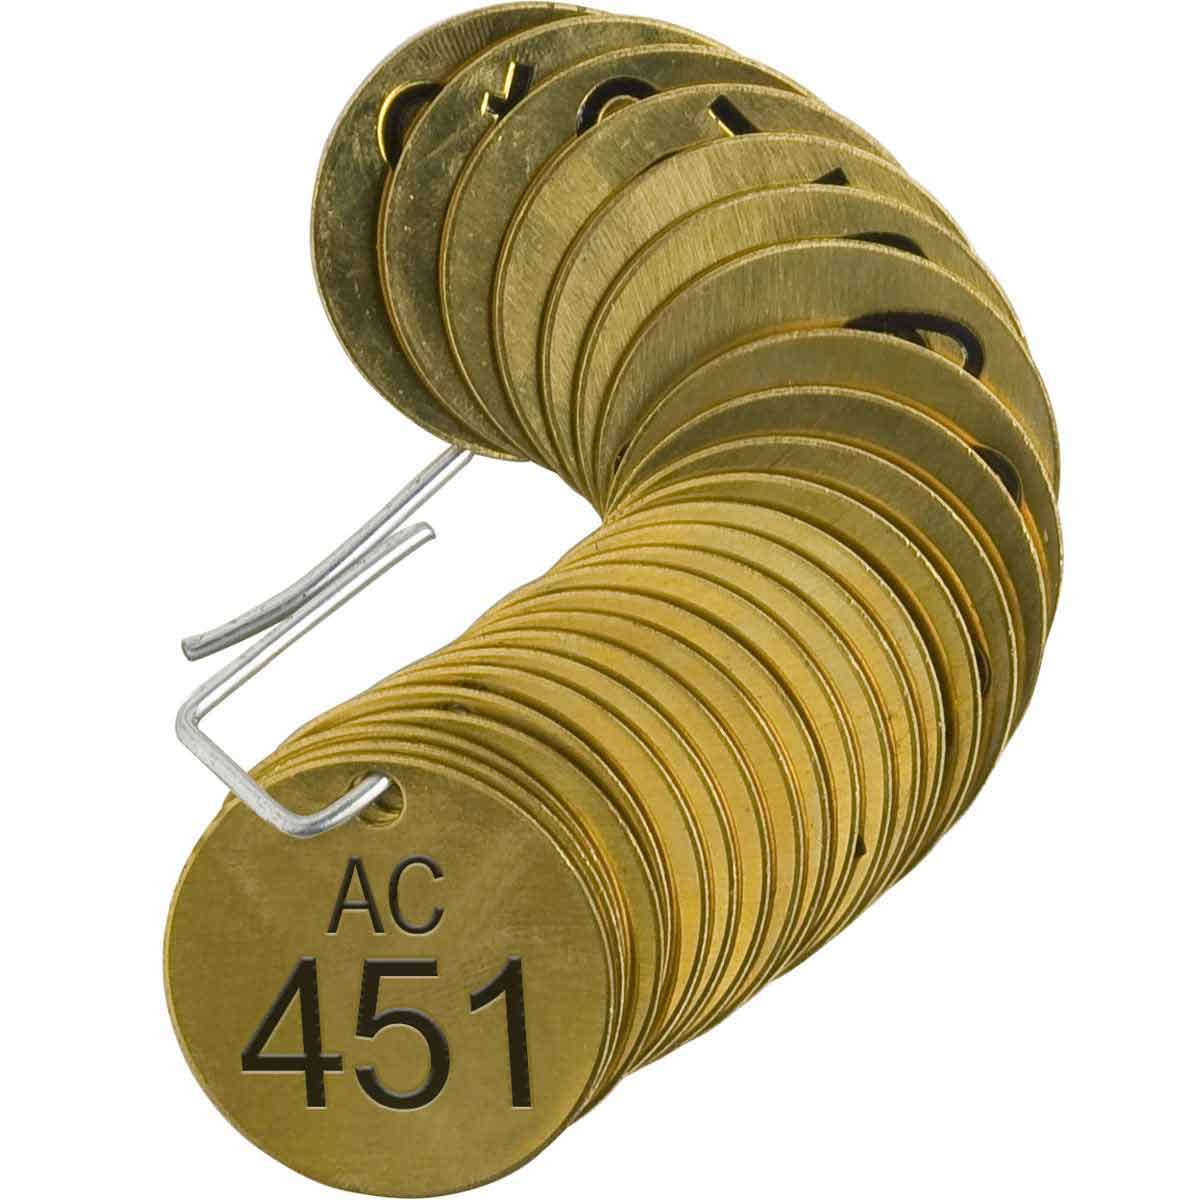 Pack of 25 Tags Legend AC Stamped Brass Valve Tags Numbers 451-475 Brady  23494 1 1//2 Diameter